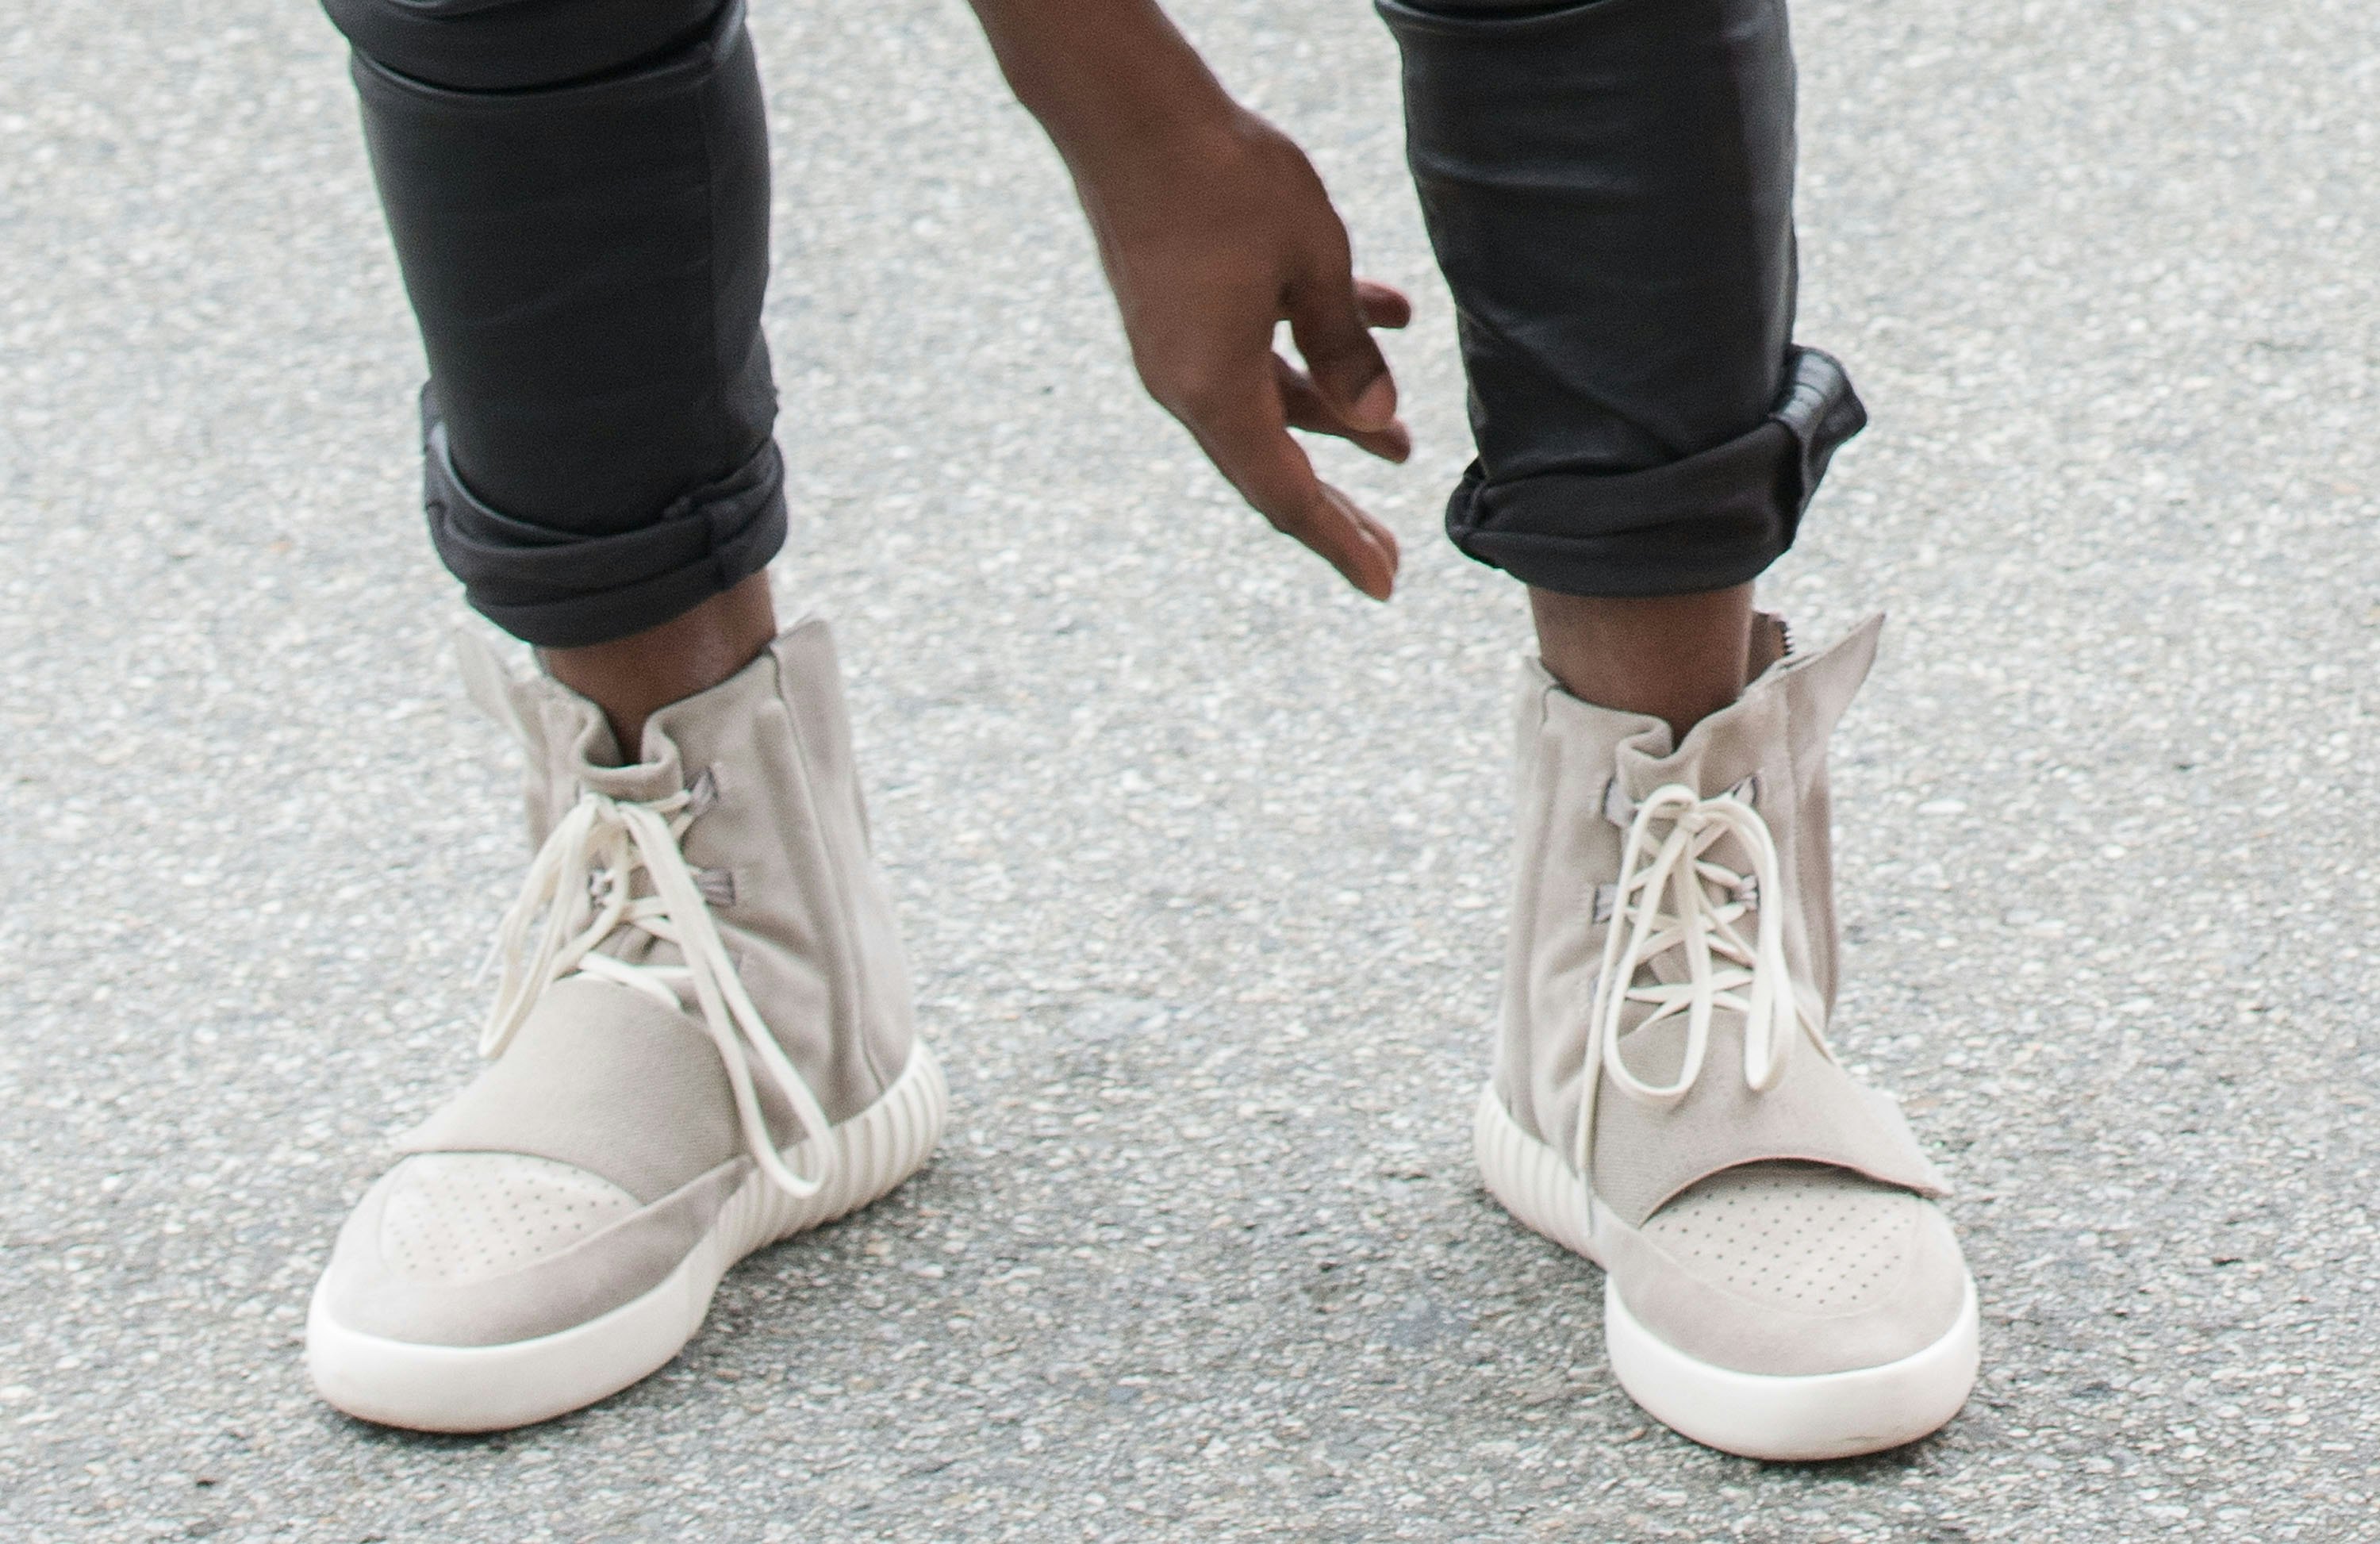 yeezy boost 750 fit